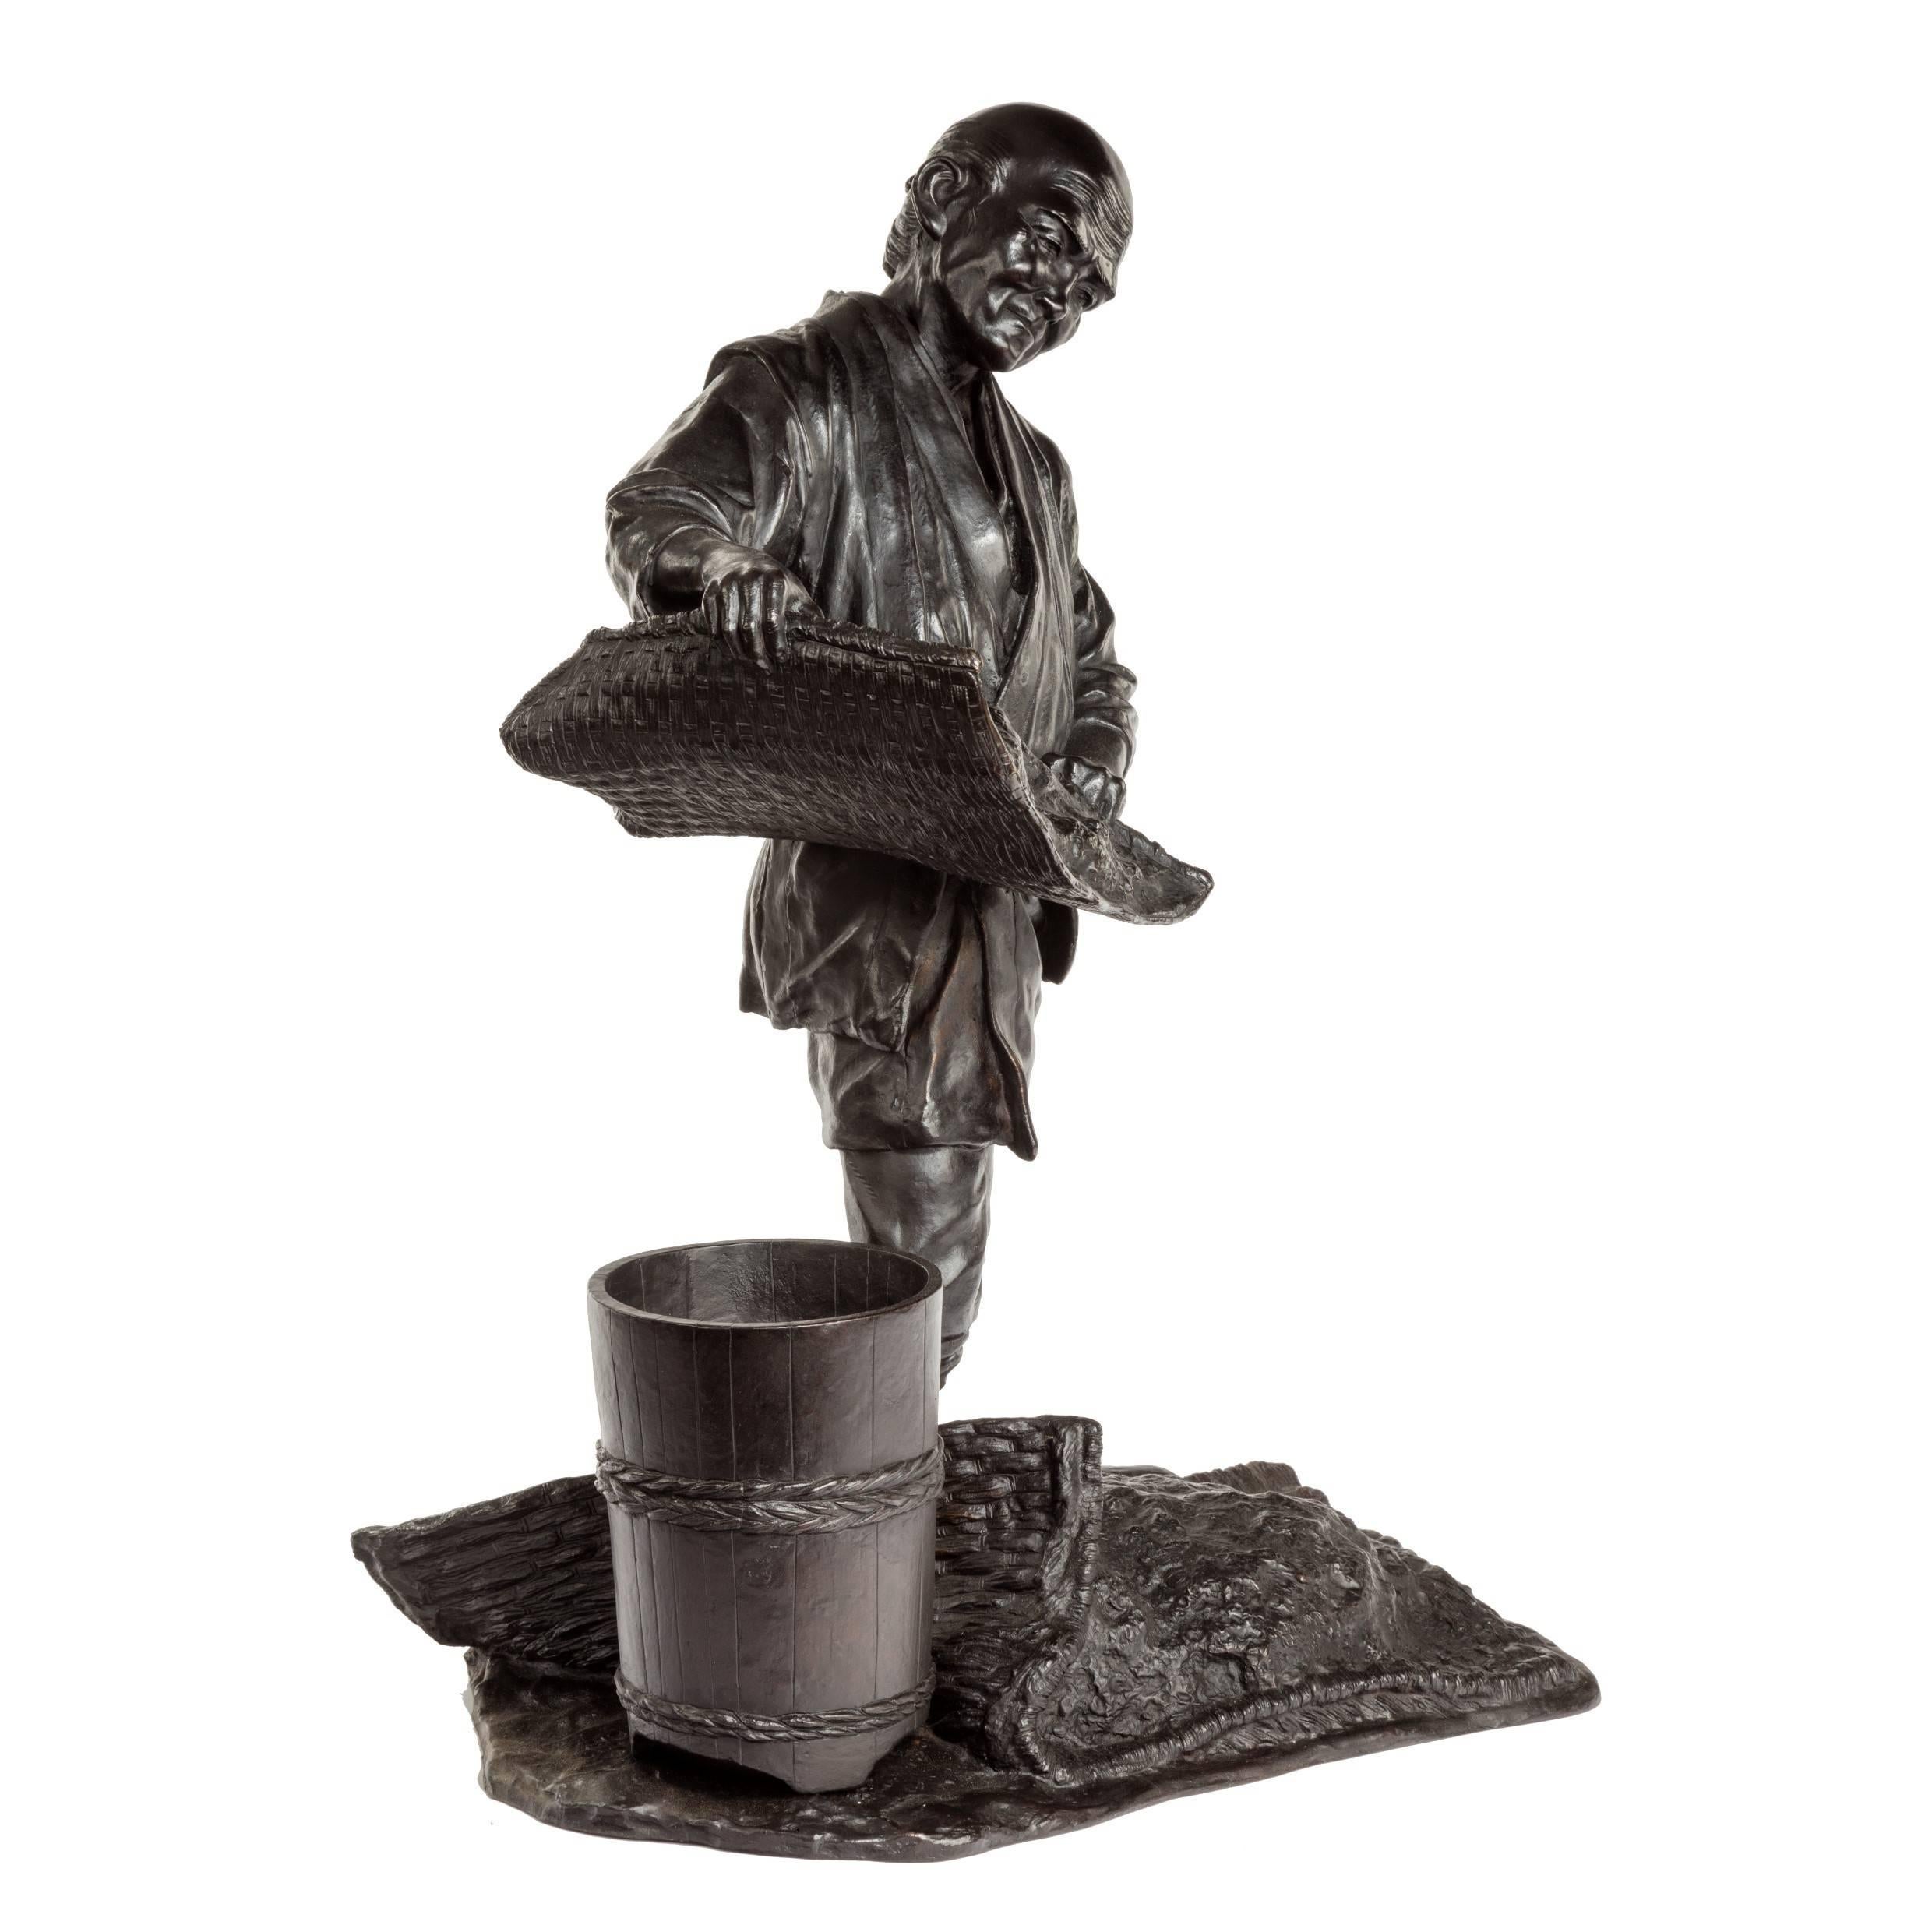 Unusual Meiji period bronze of a labourer sieving through a woven reed mat with another at his feet and a wooden bucket at his side, signed.